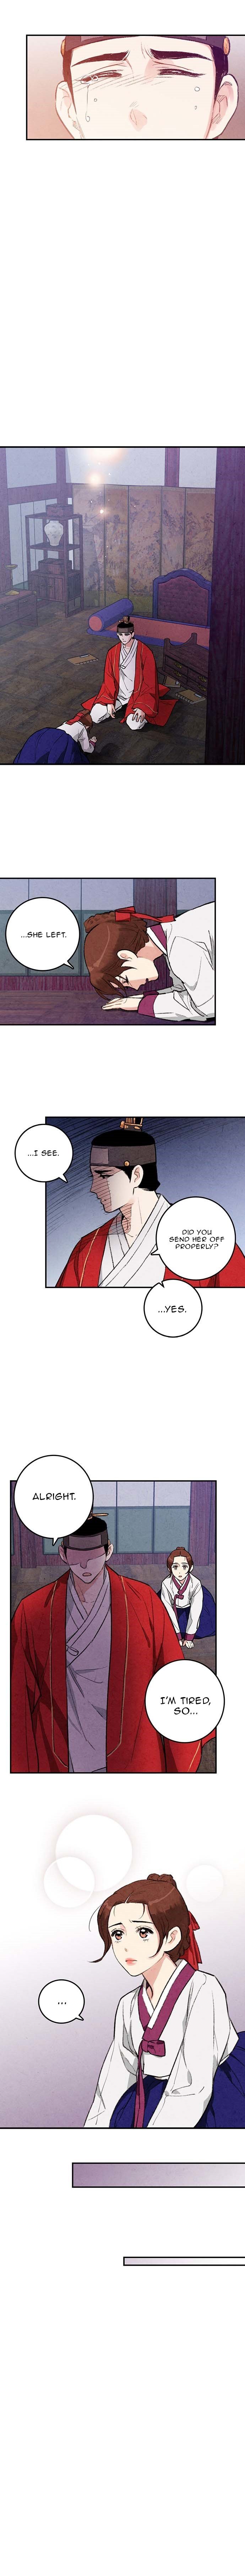 Joseon's Ban on Marriage ch.17